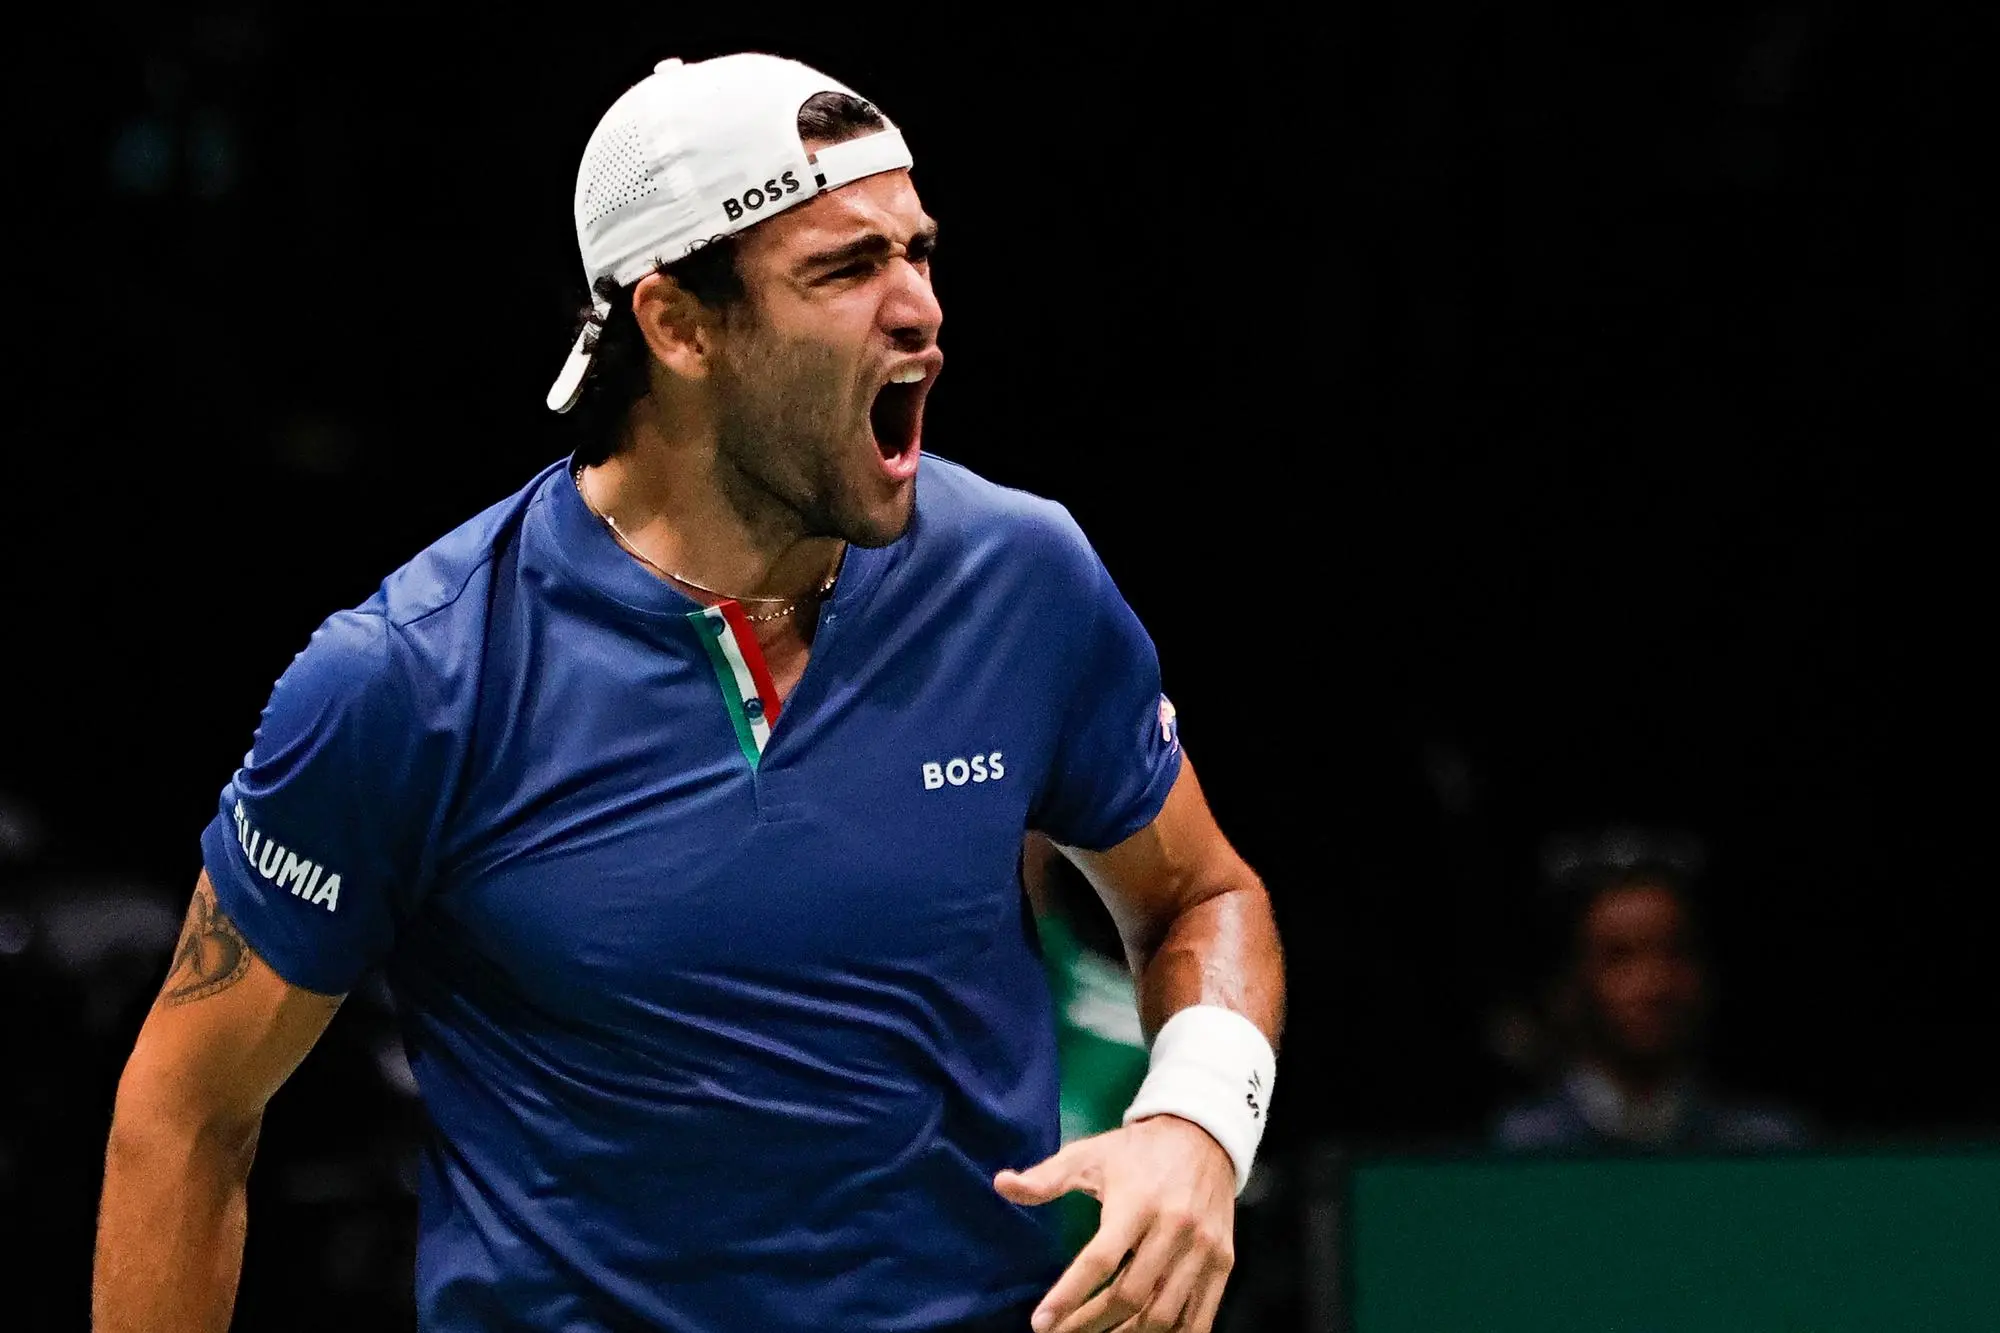 Italian tennis player Matteo Berrettini in action against Croatian player Borna Coric during the match of Davis Cup by Rakuten Final Group Stage A at Unipol Arena in Casalecchio (Bologna) Italy, 14 September 2022. ANSA /ELISABETTA BARACCHI